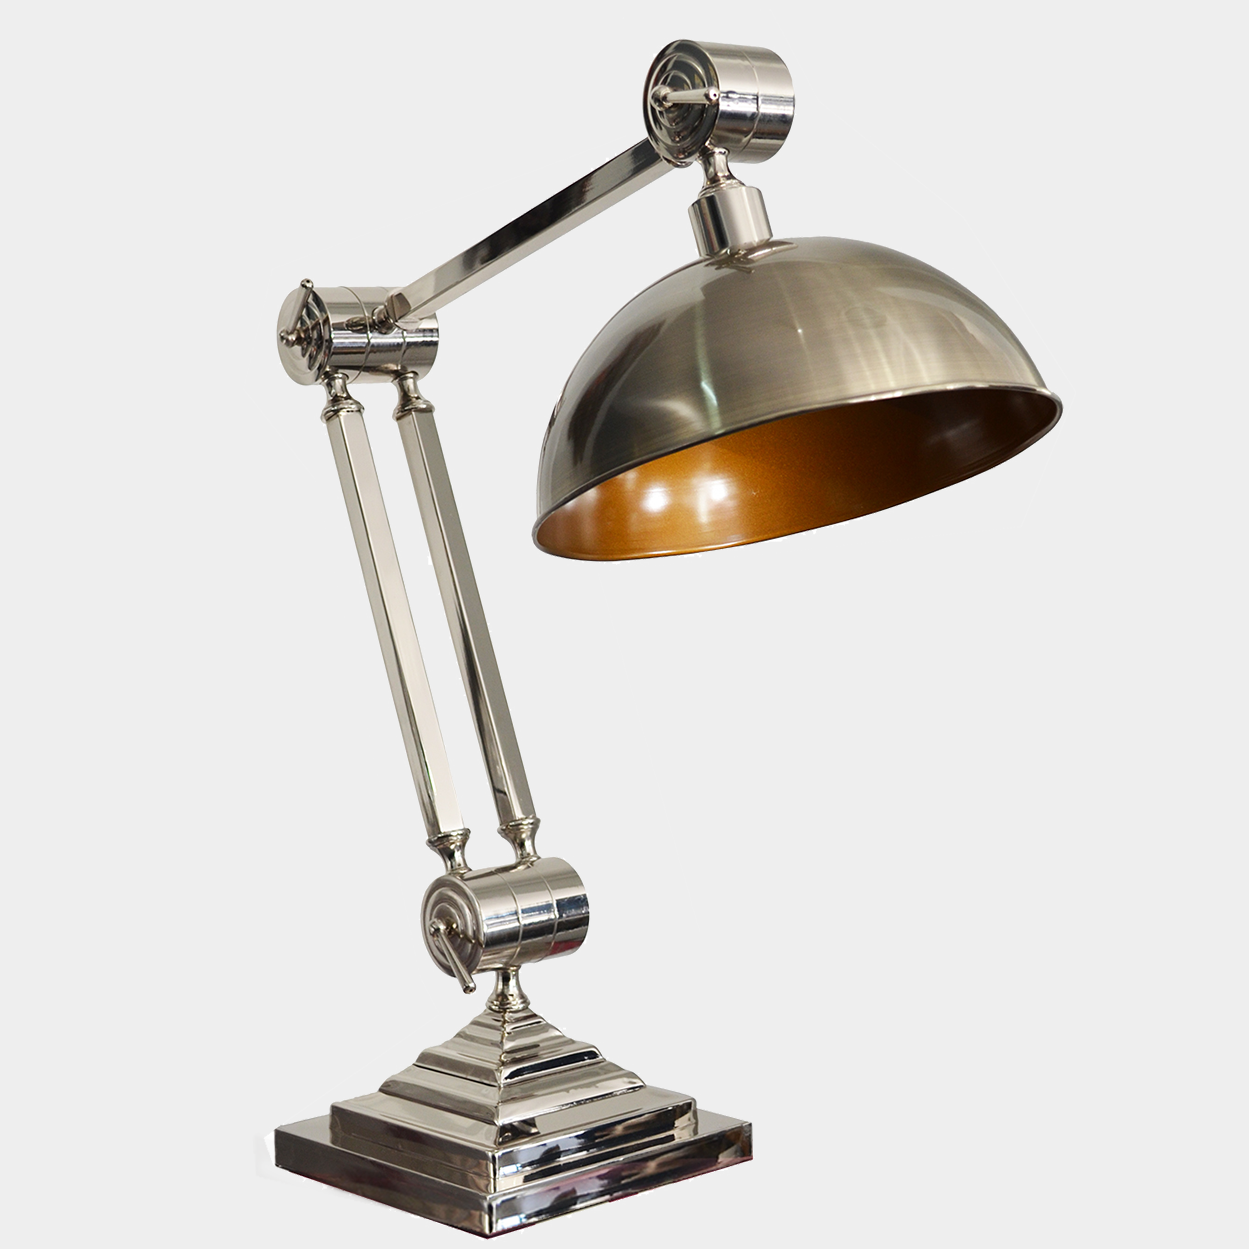 The Captain Table Lamp